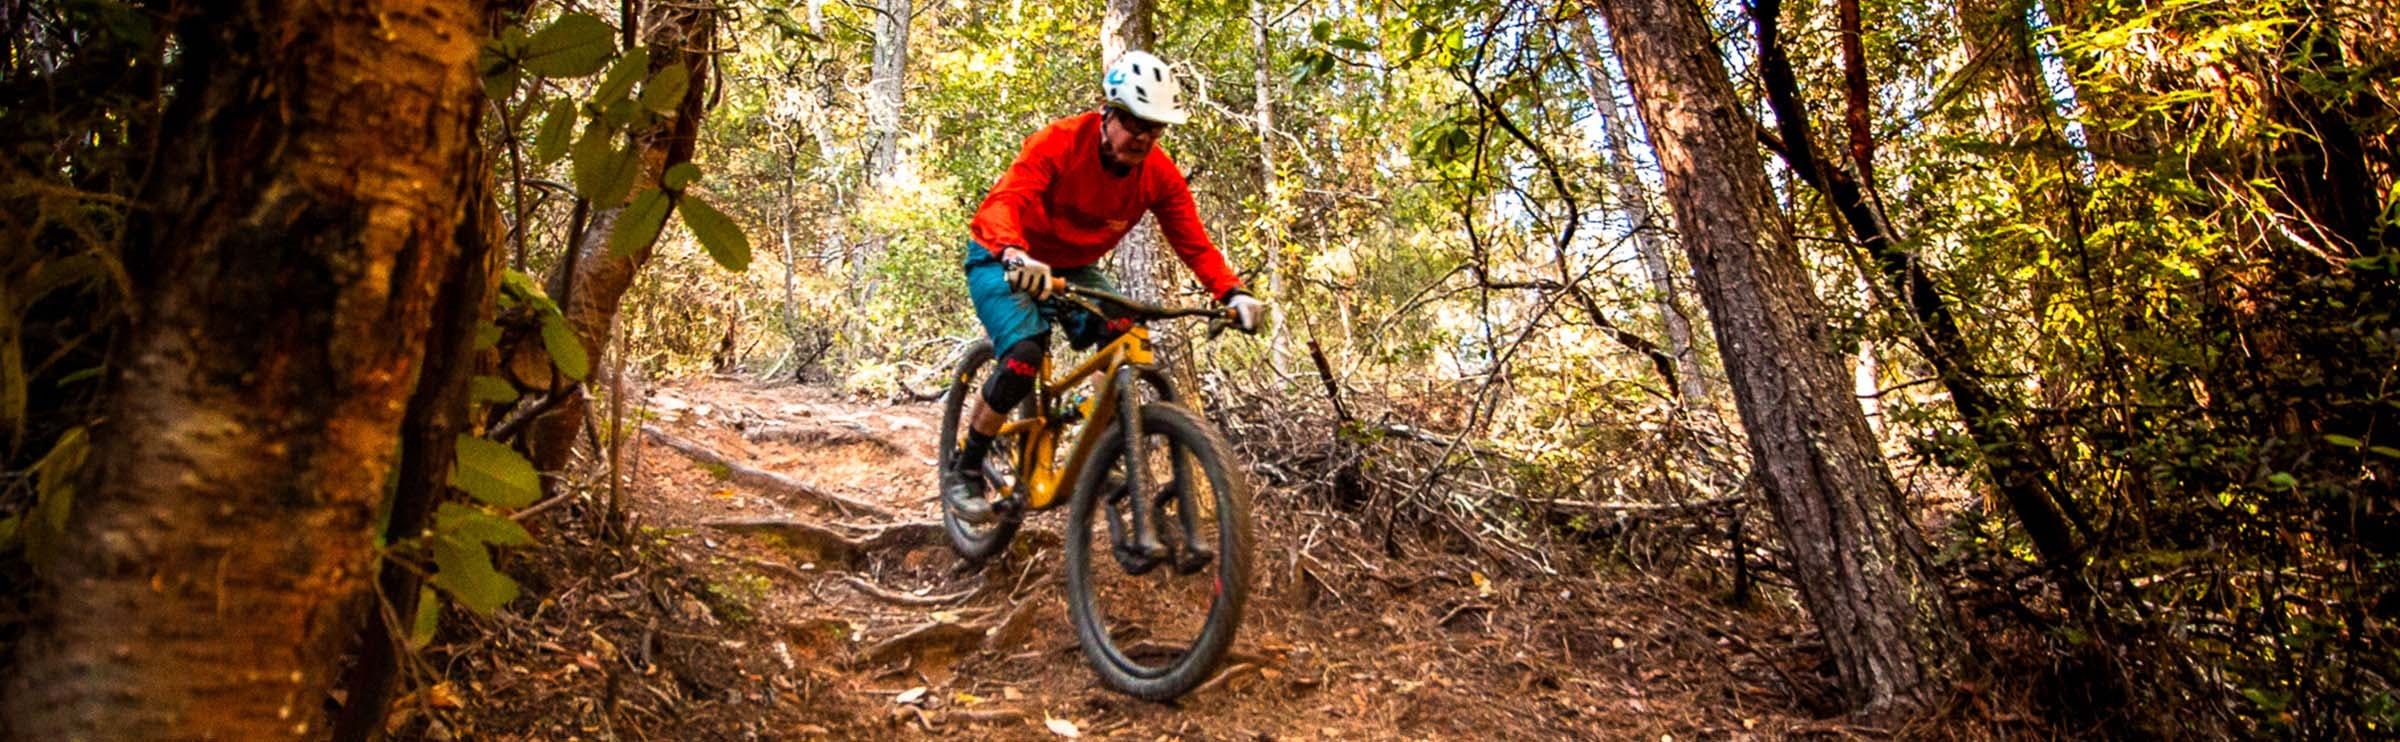 Bobby McMullen descending roots on his mountain bike